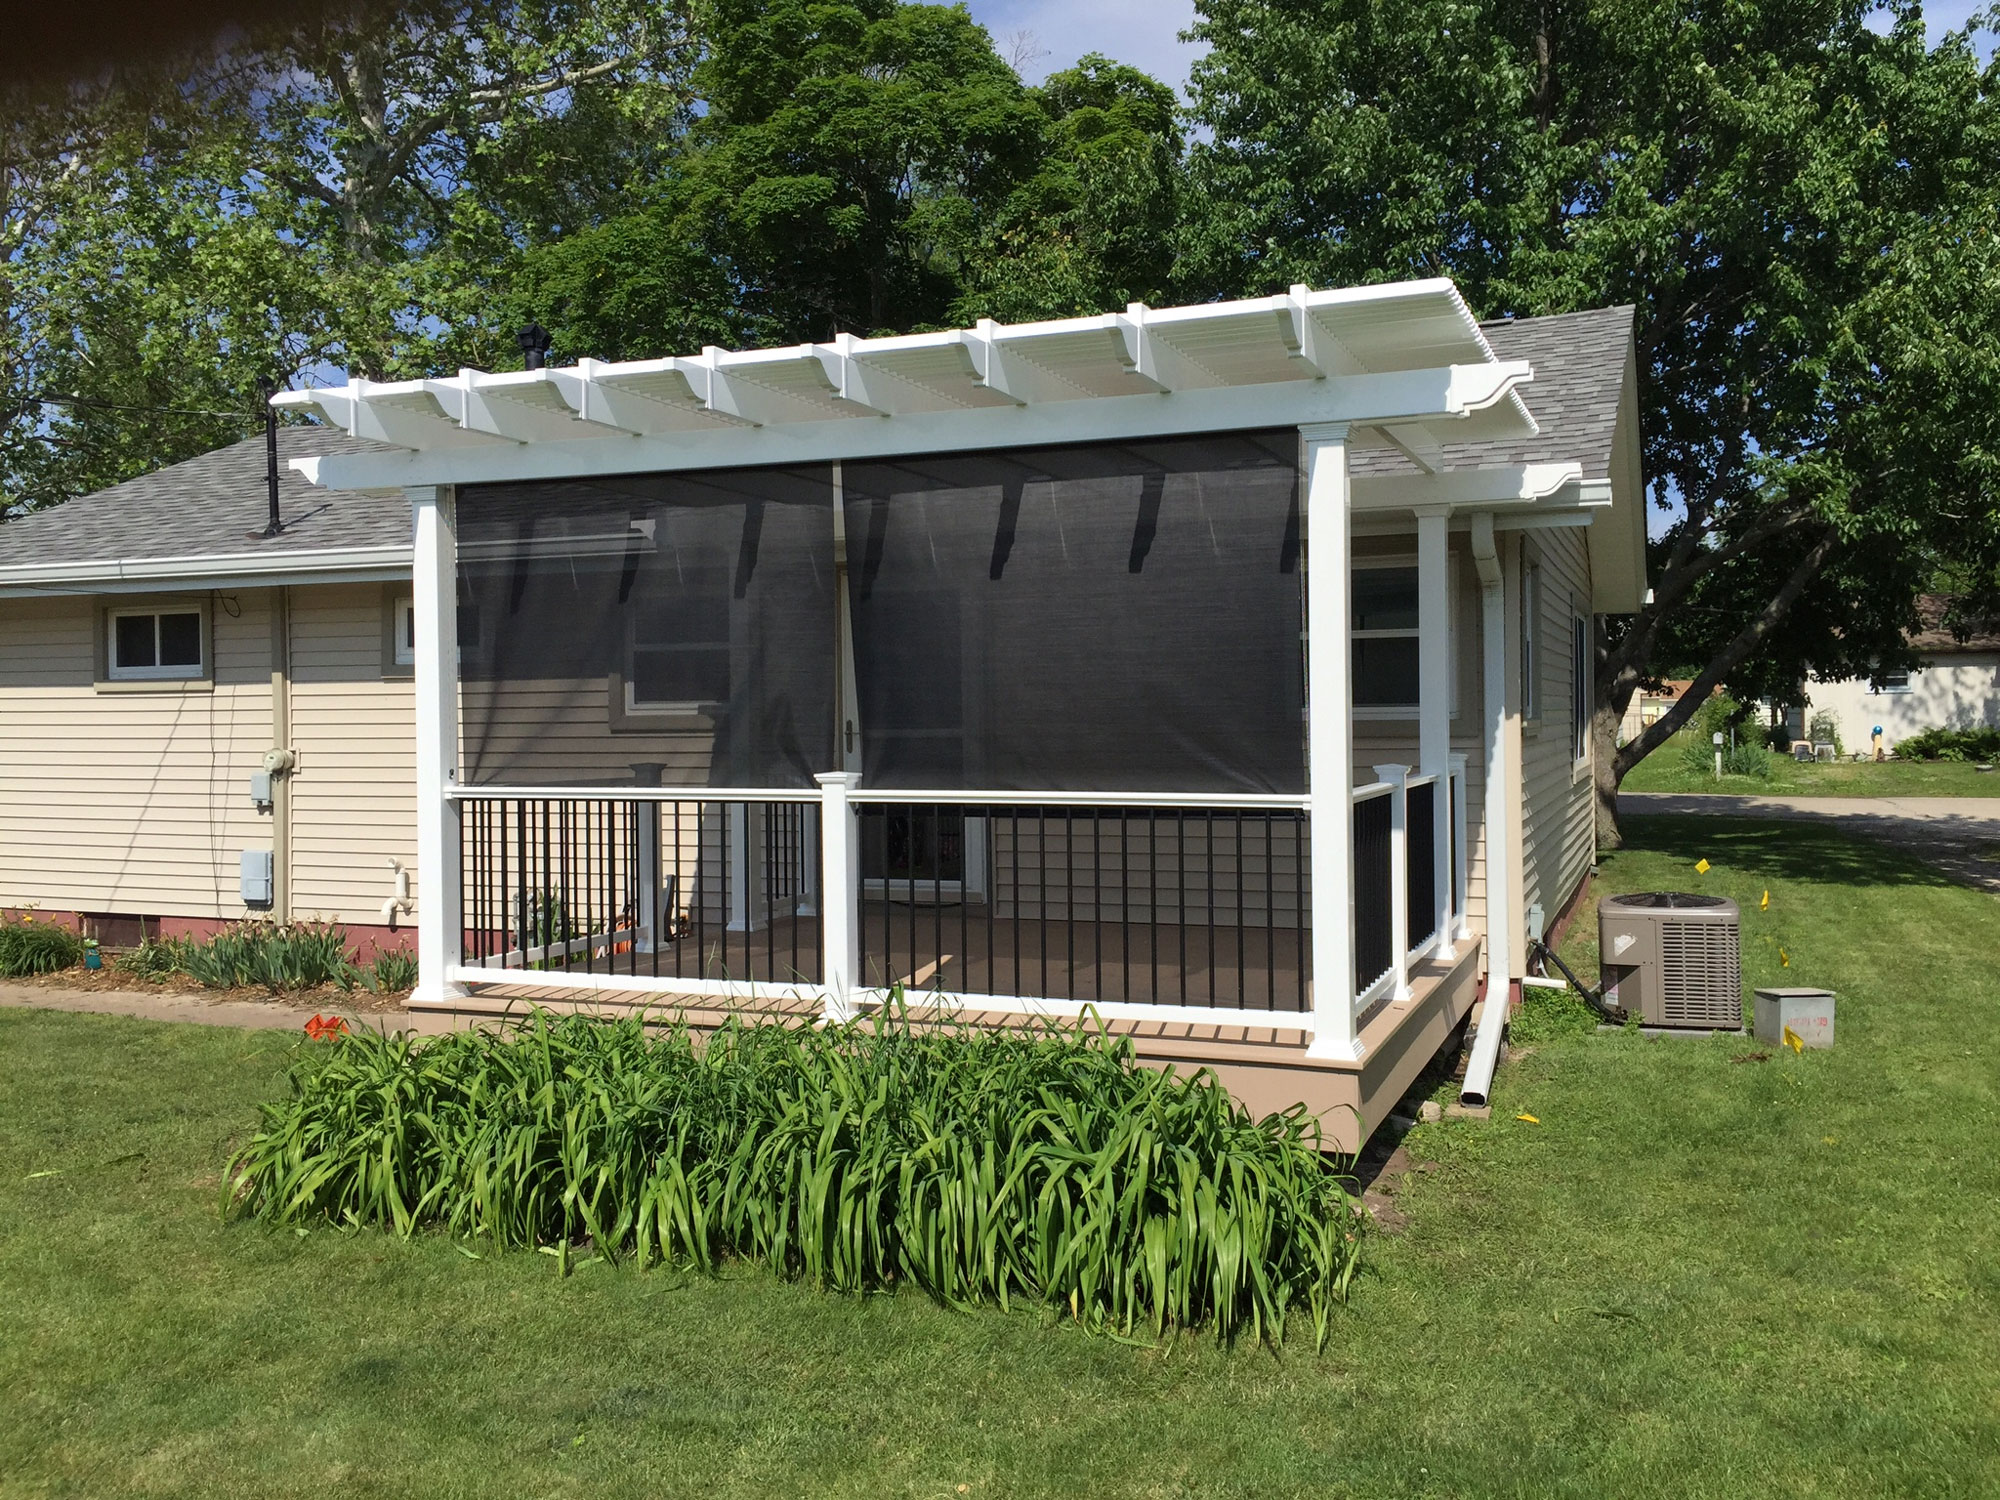 This small house extended its space by adding a back porch covered by a white pergola. They have leafy plants next to their brown porch and a sidewalk near it.